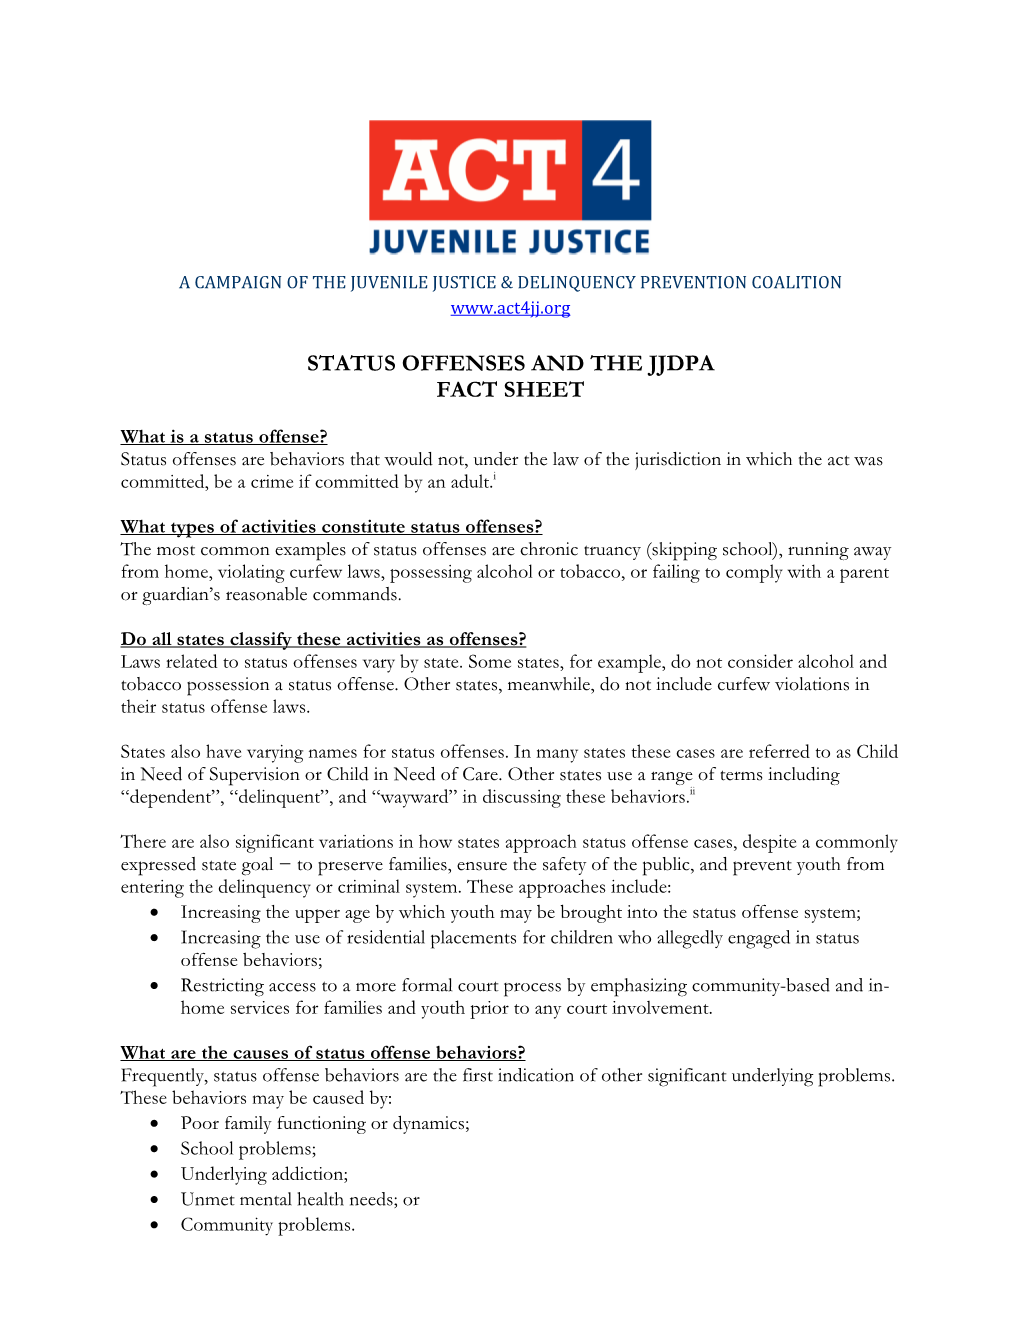 Status Offenses and the Jjdpa Fact Sheet